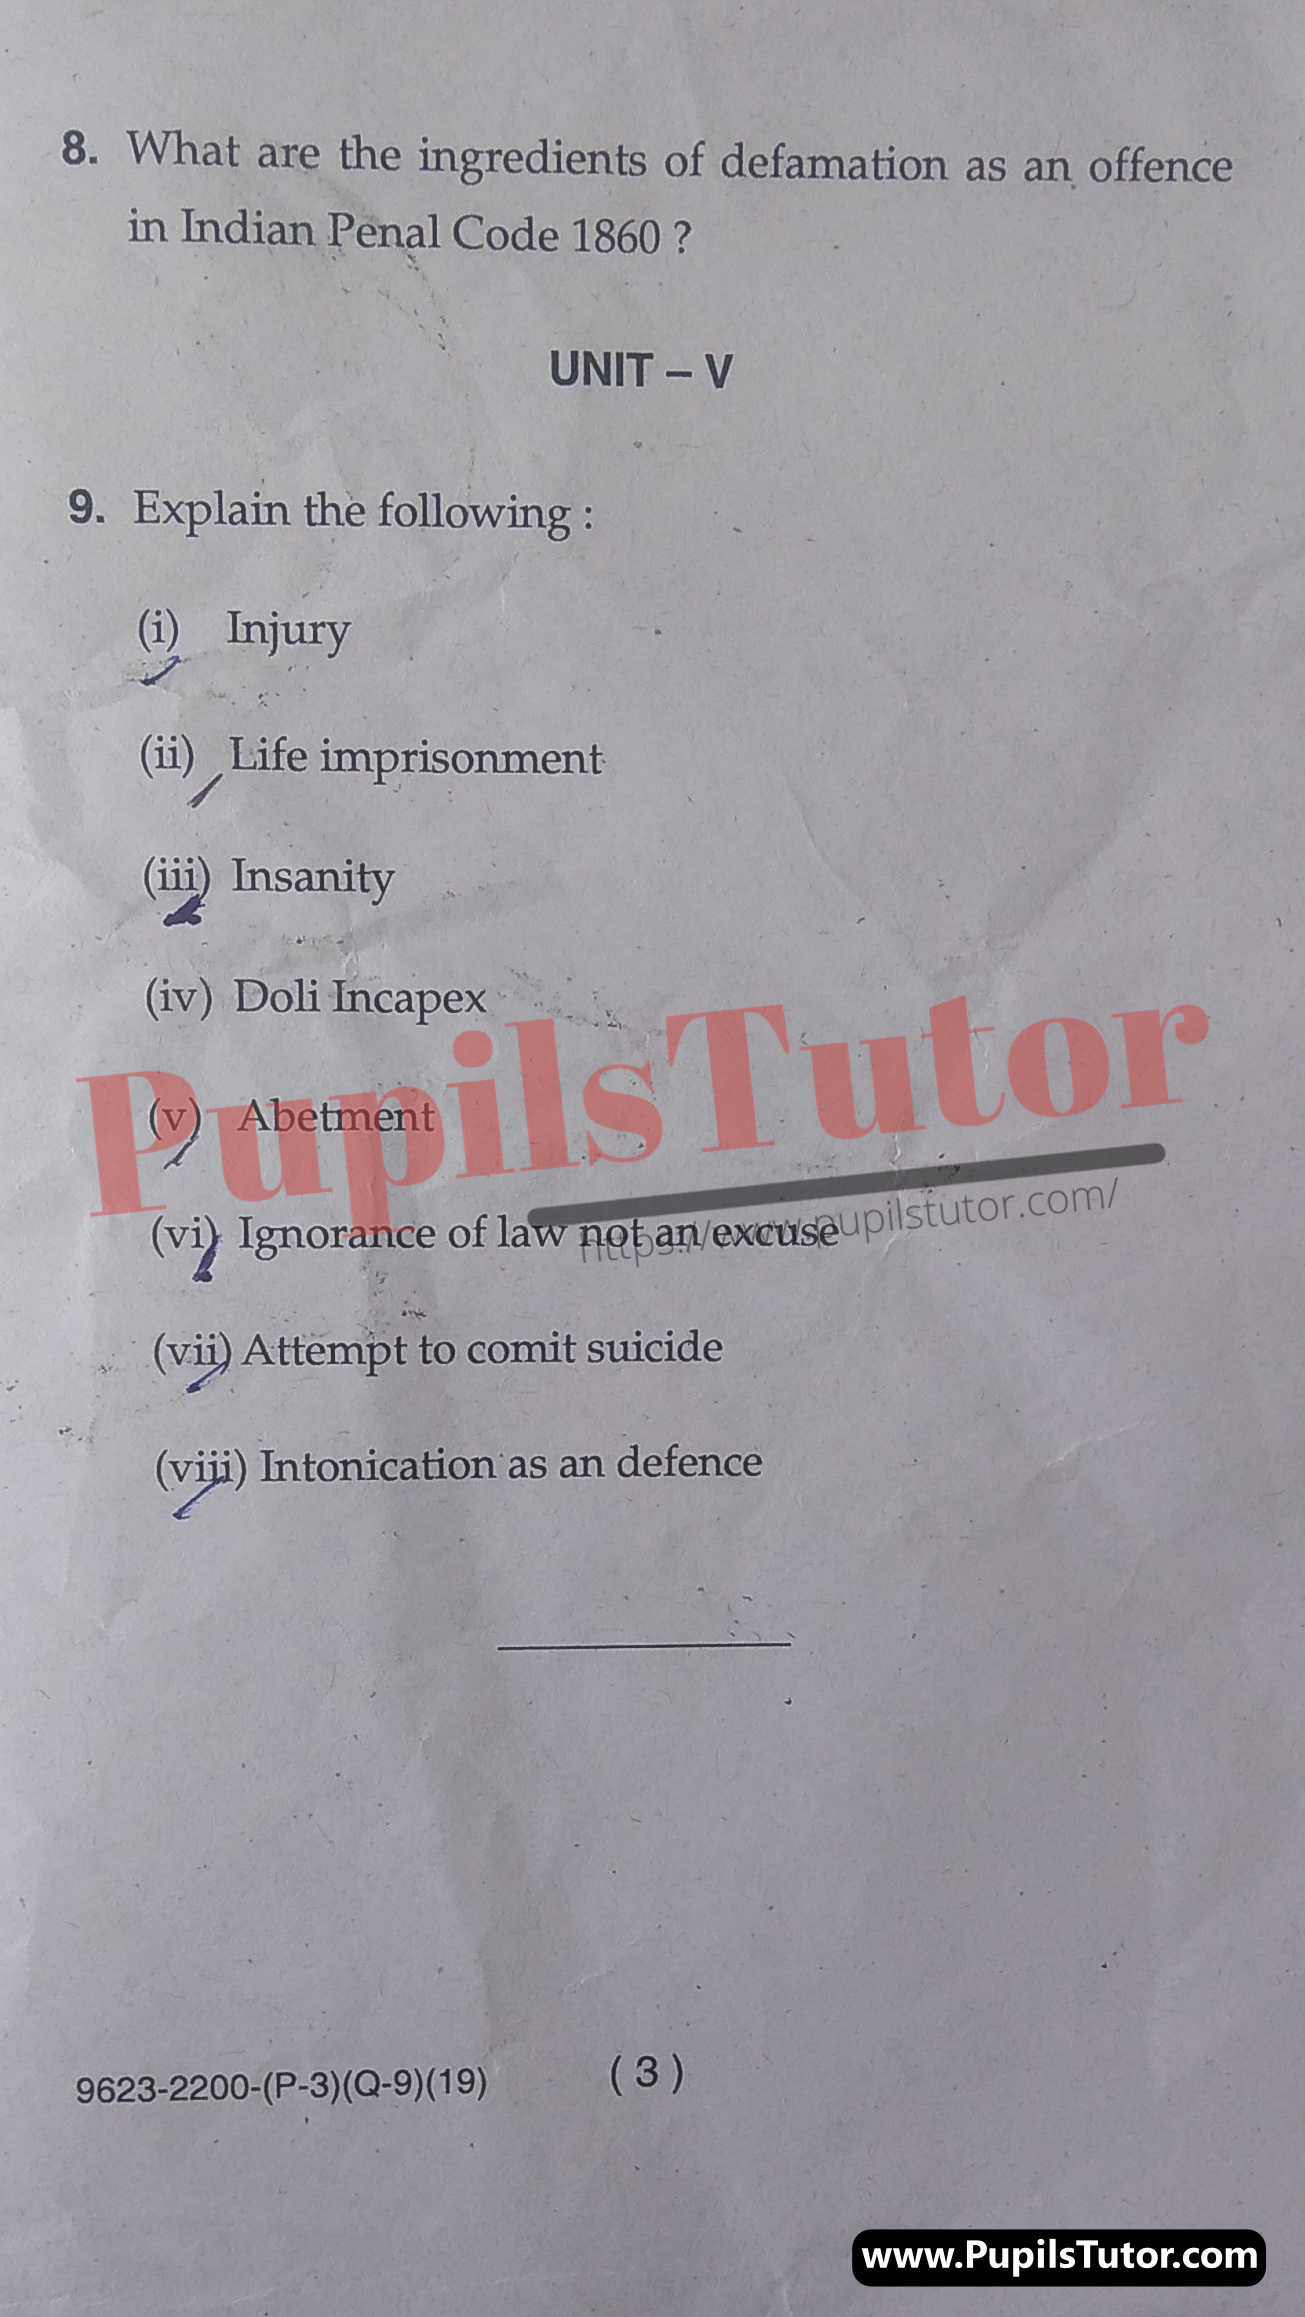 Free Download PDF Of M.D. University LL.B. First Semester Latest Question Paper For Law Of Crimes Subject (Page 3) - https://www.pupilstutor.com